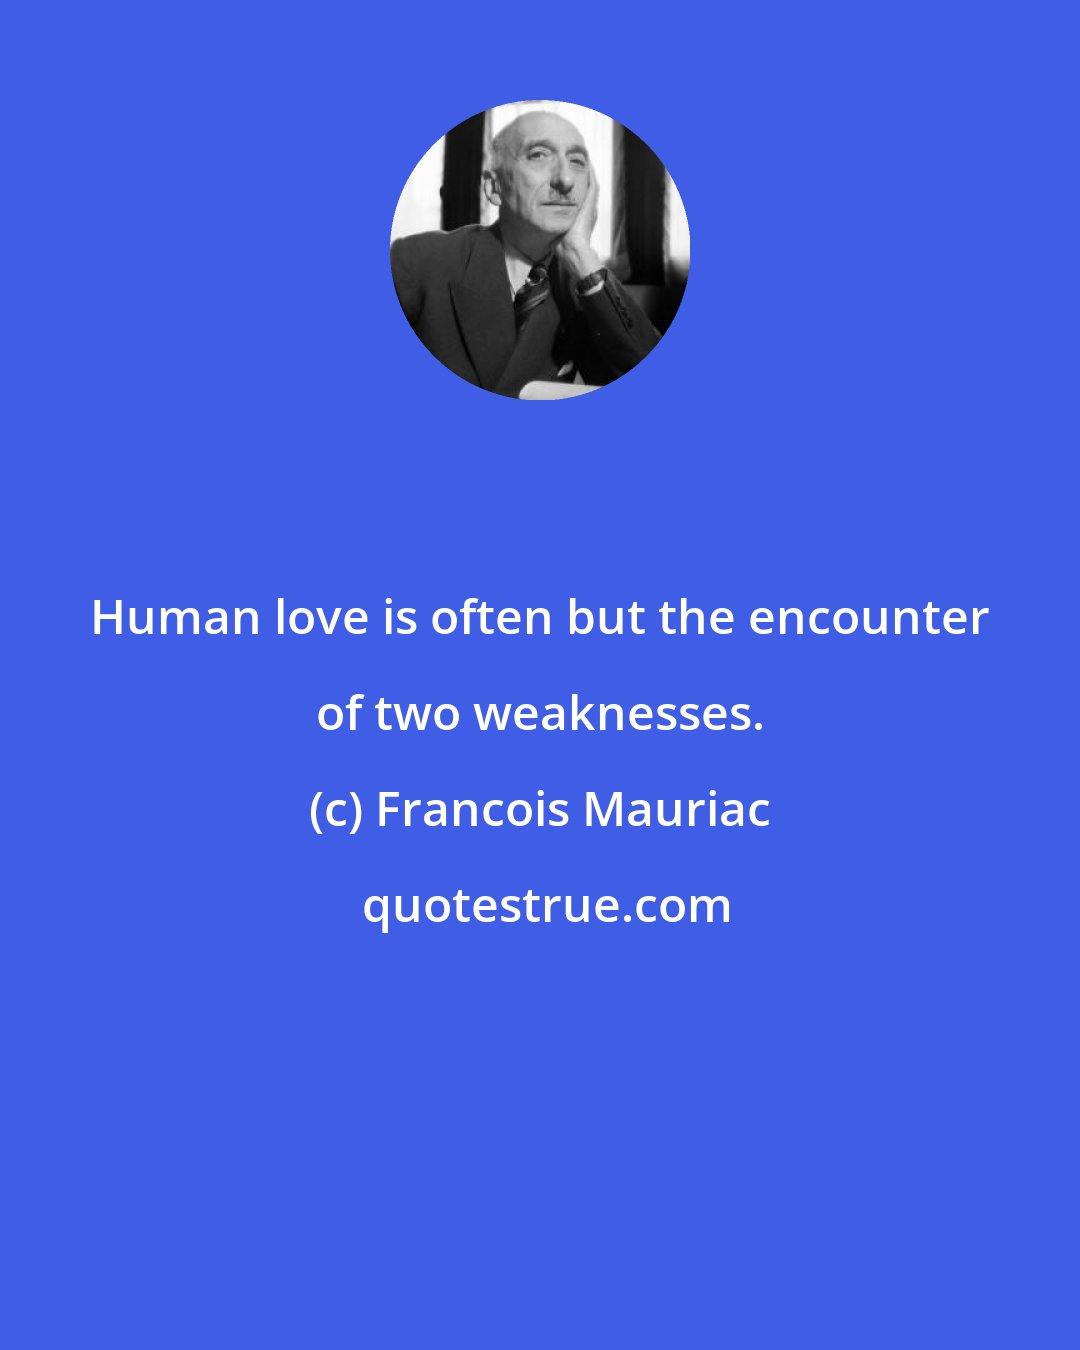 Francois Mauriac: Human love is often but the encounter of two weaknesses.